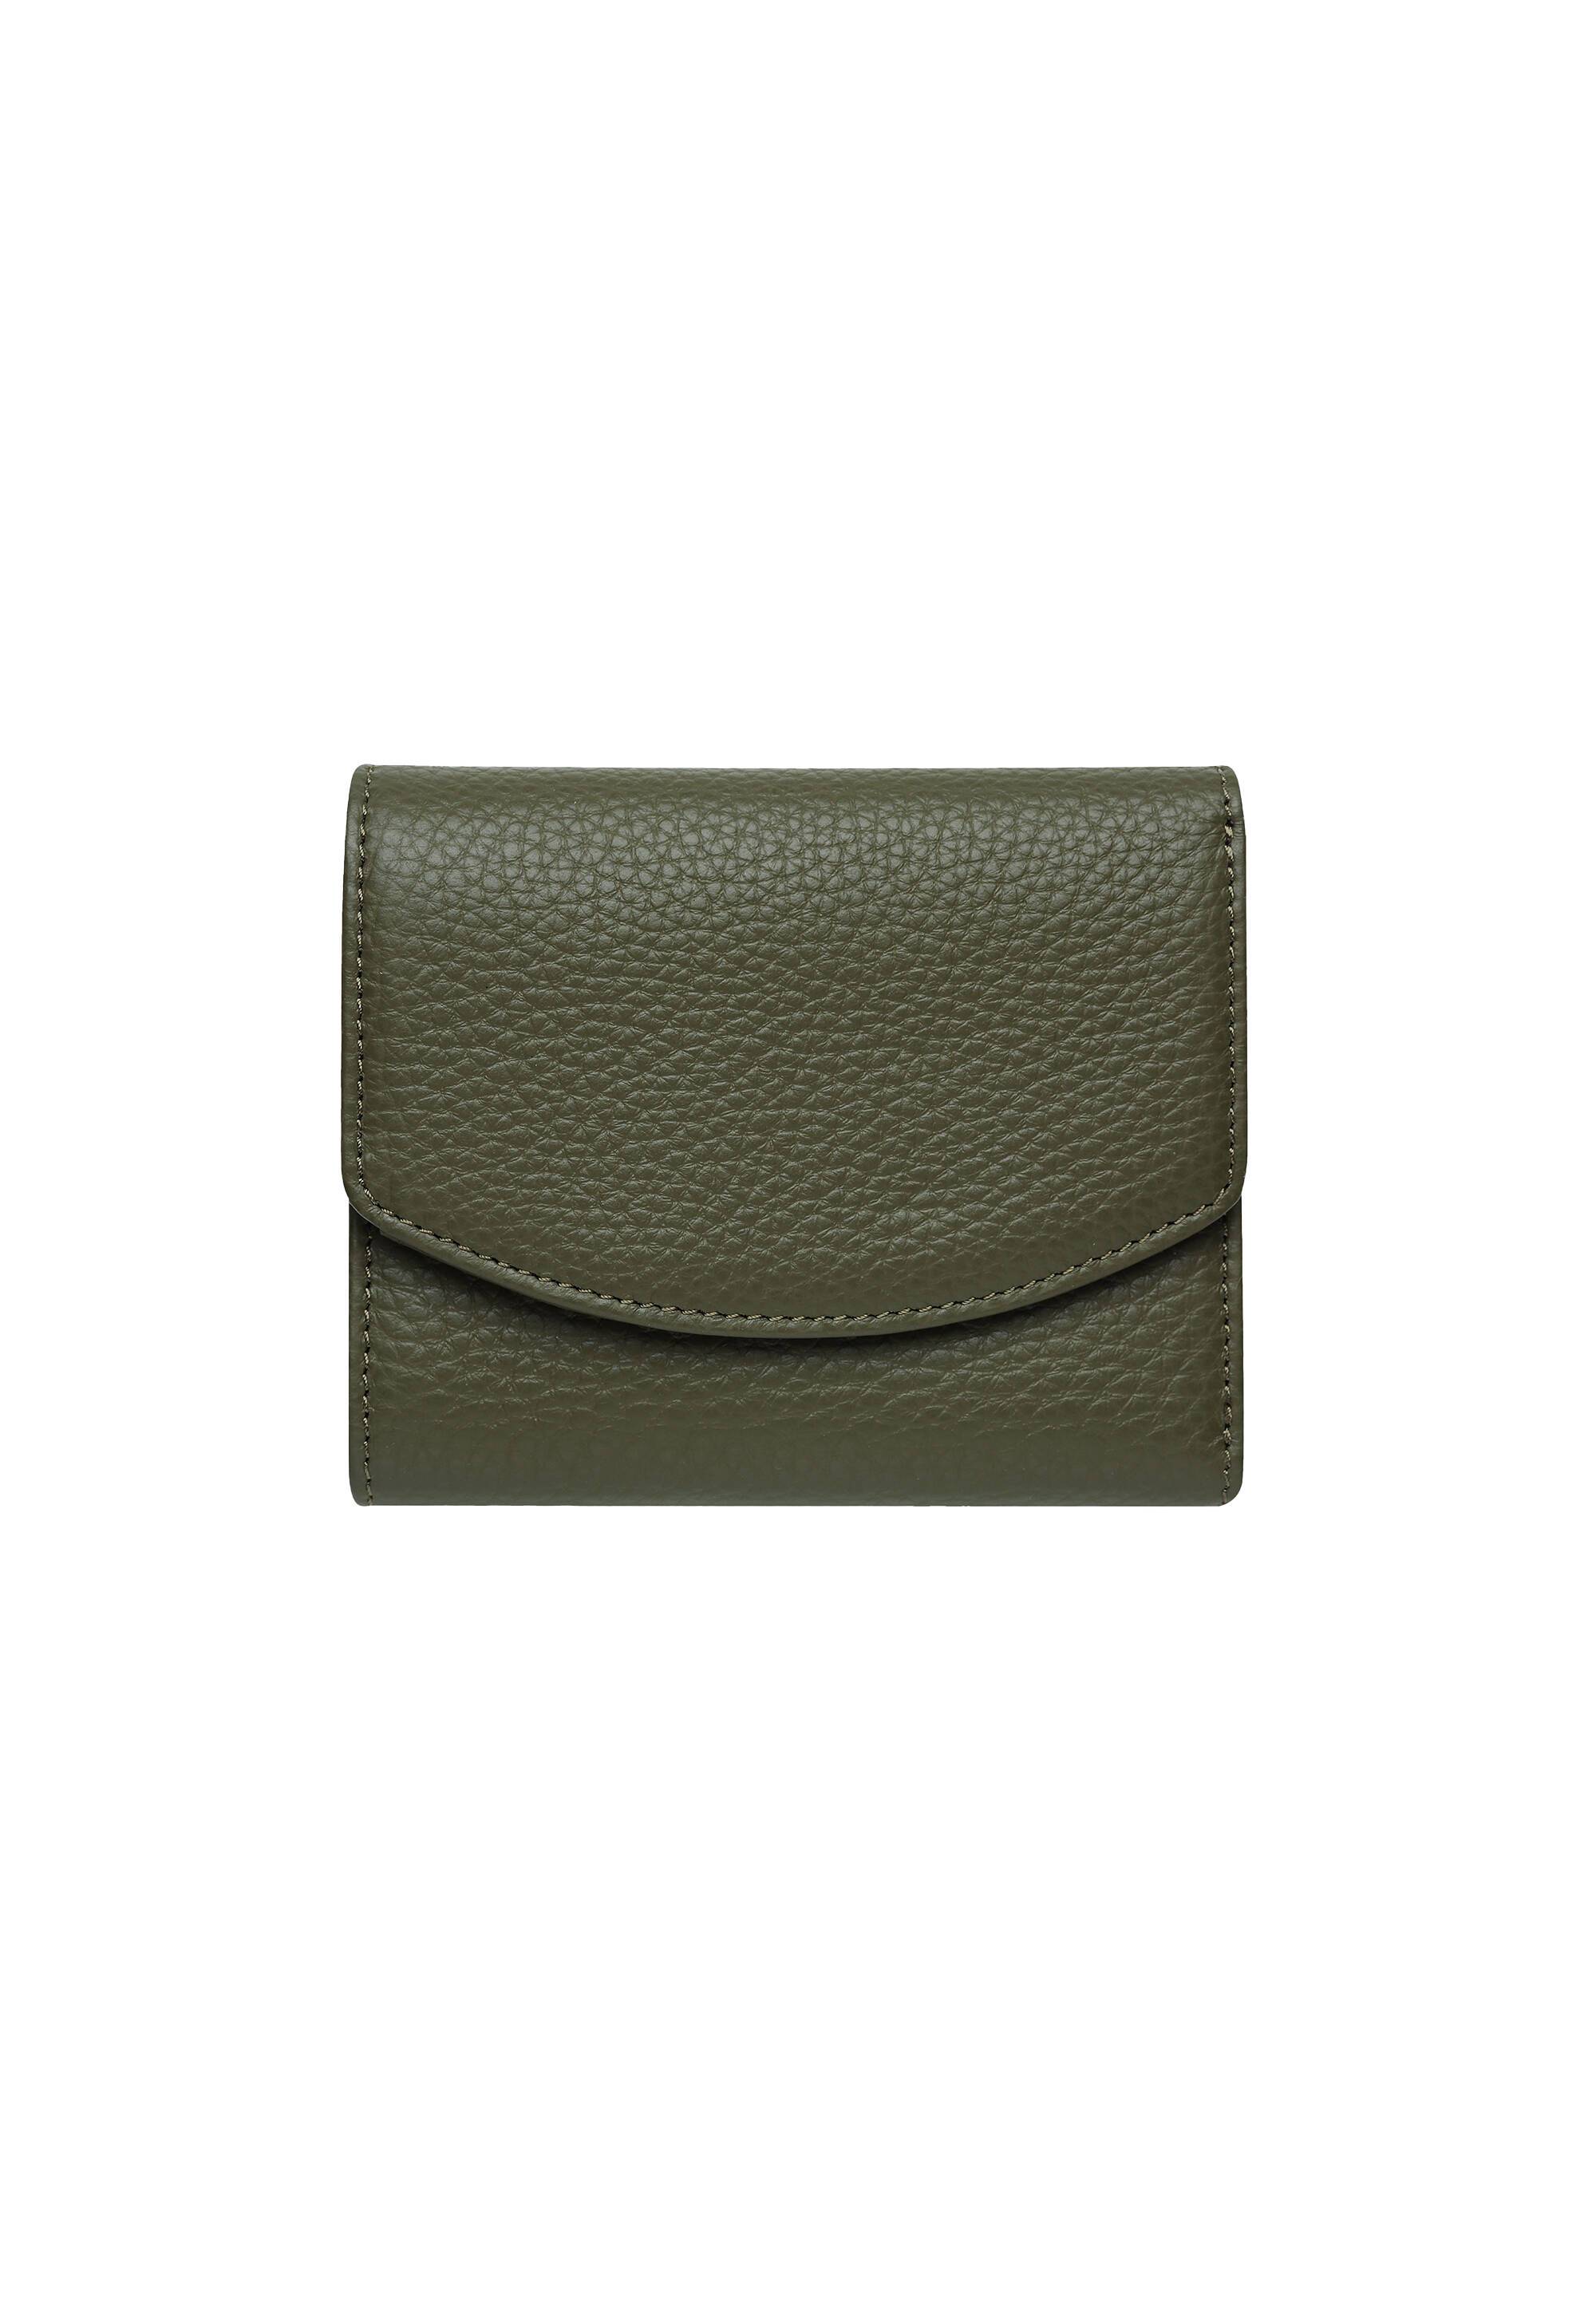 STATUS ANXIETY LUCKY SOMETIMES WALLET - Womens-Accessories : Soul